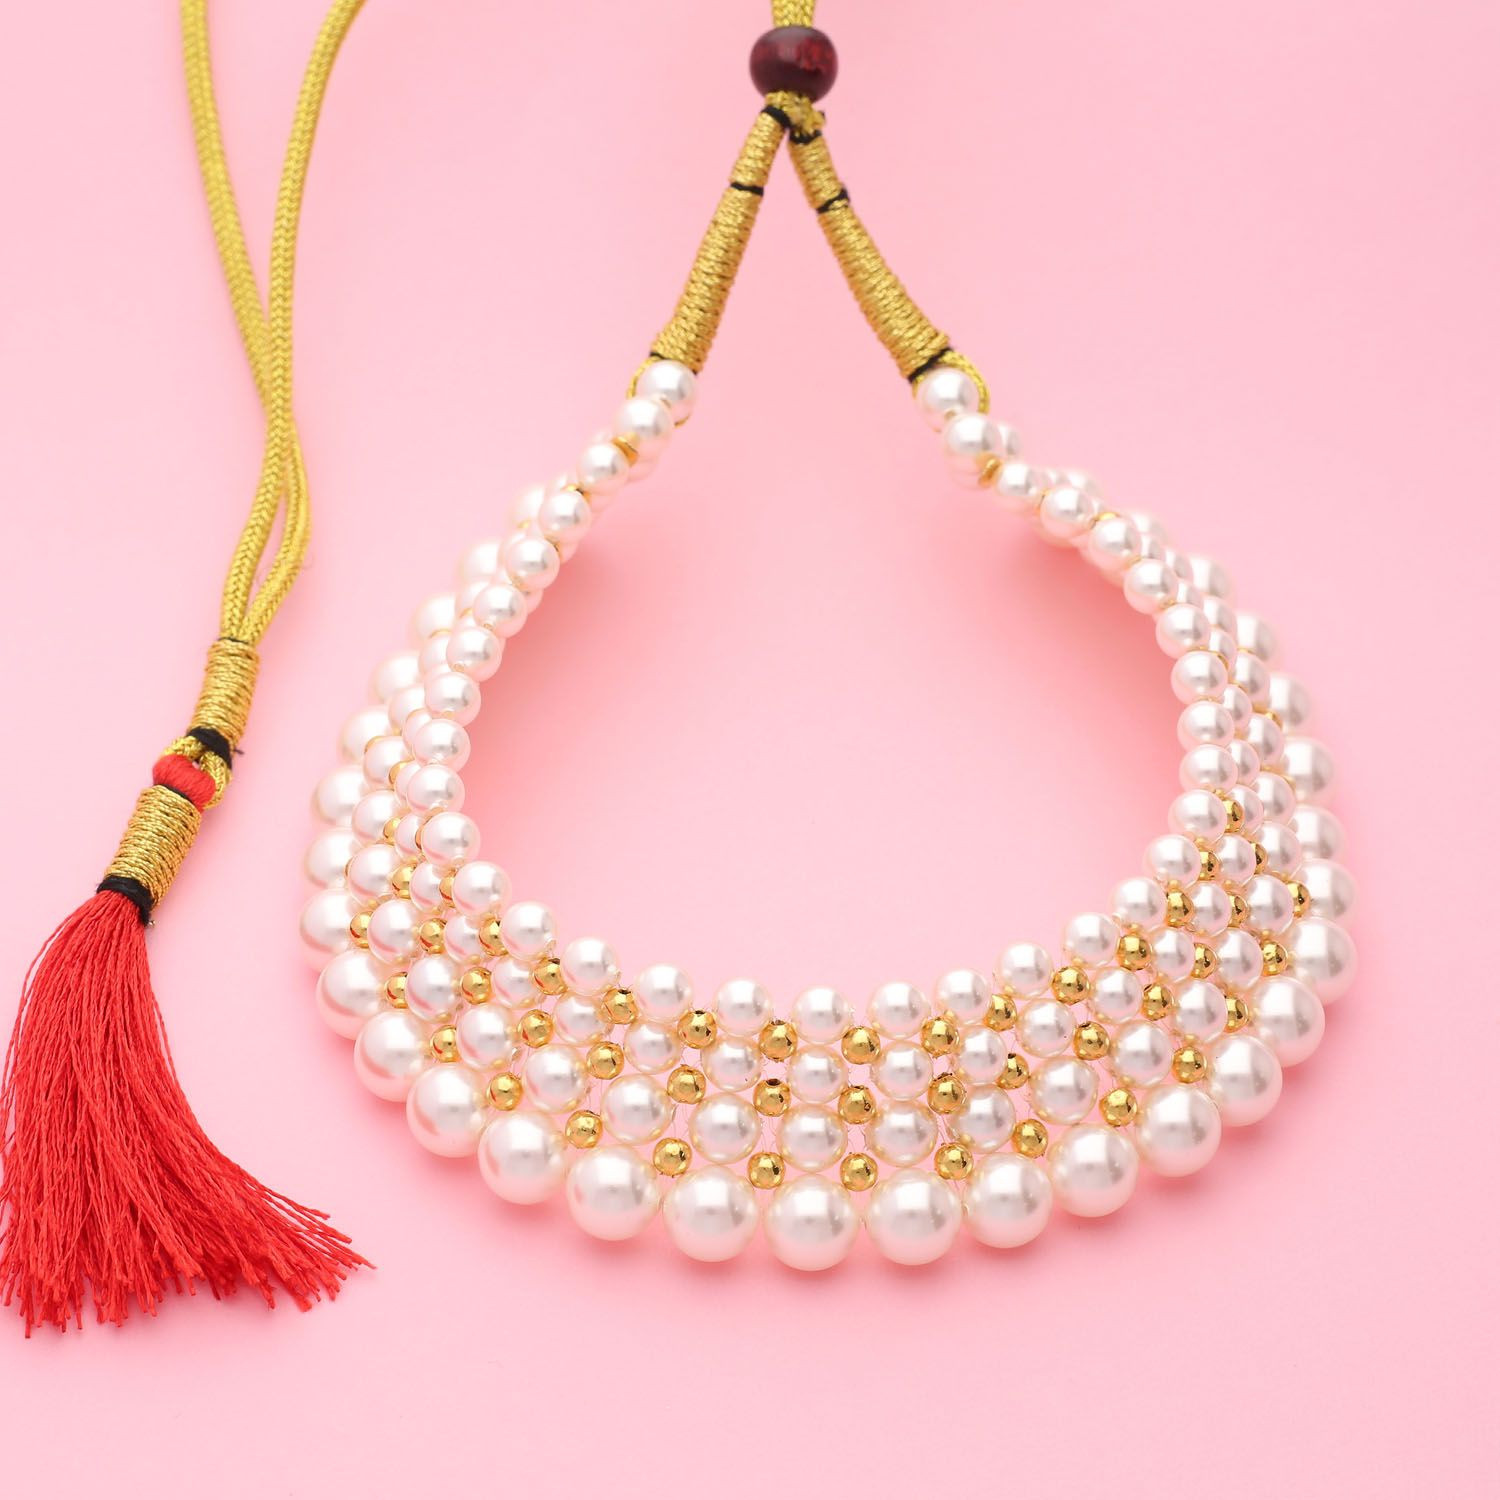 Malabar Gold Yellow Pearl Necklace